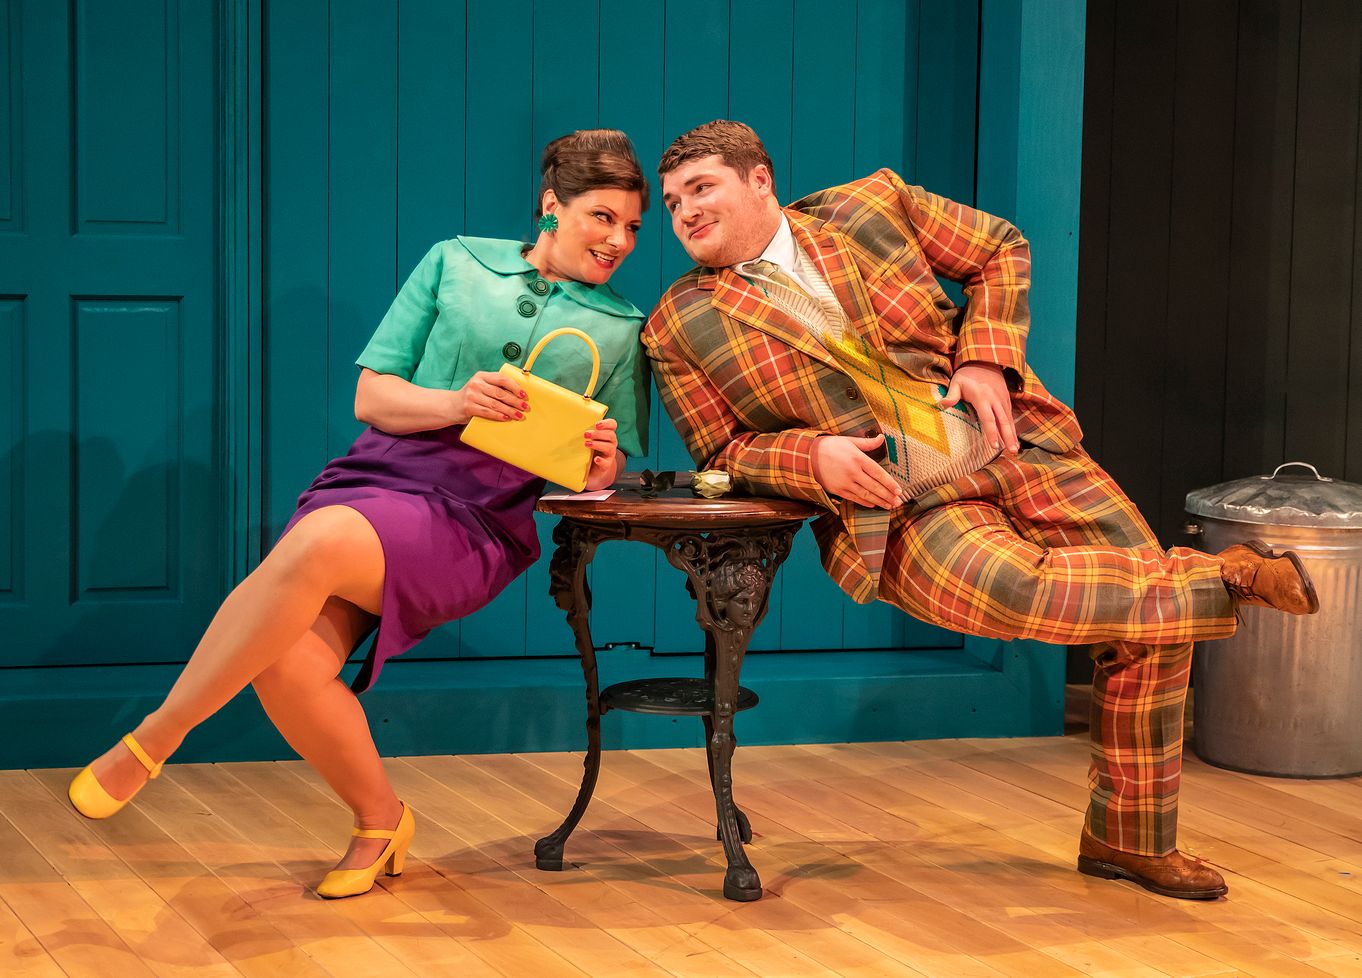 Polly Lister and Jordan Pearson in One Man, Two Guvnors. Photo by Pamela Raith.